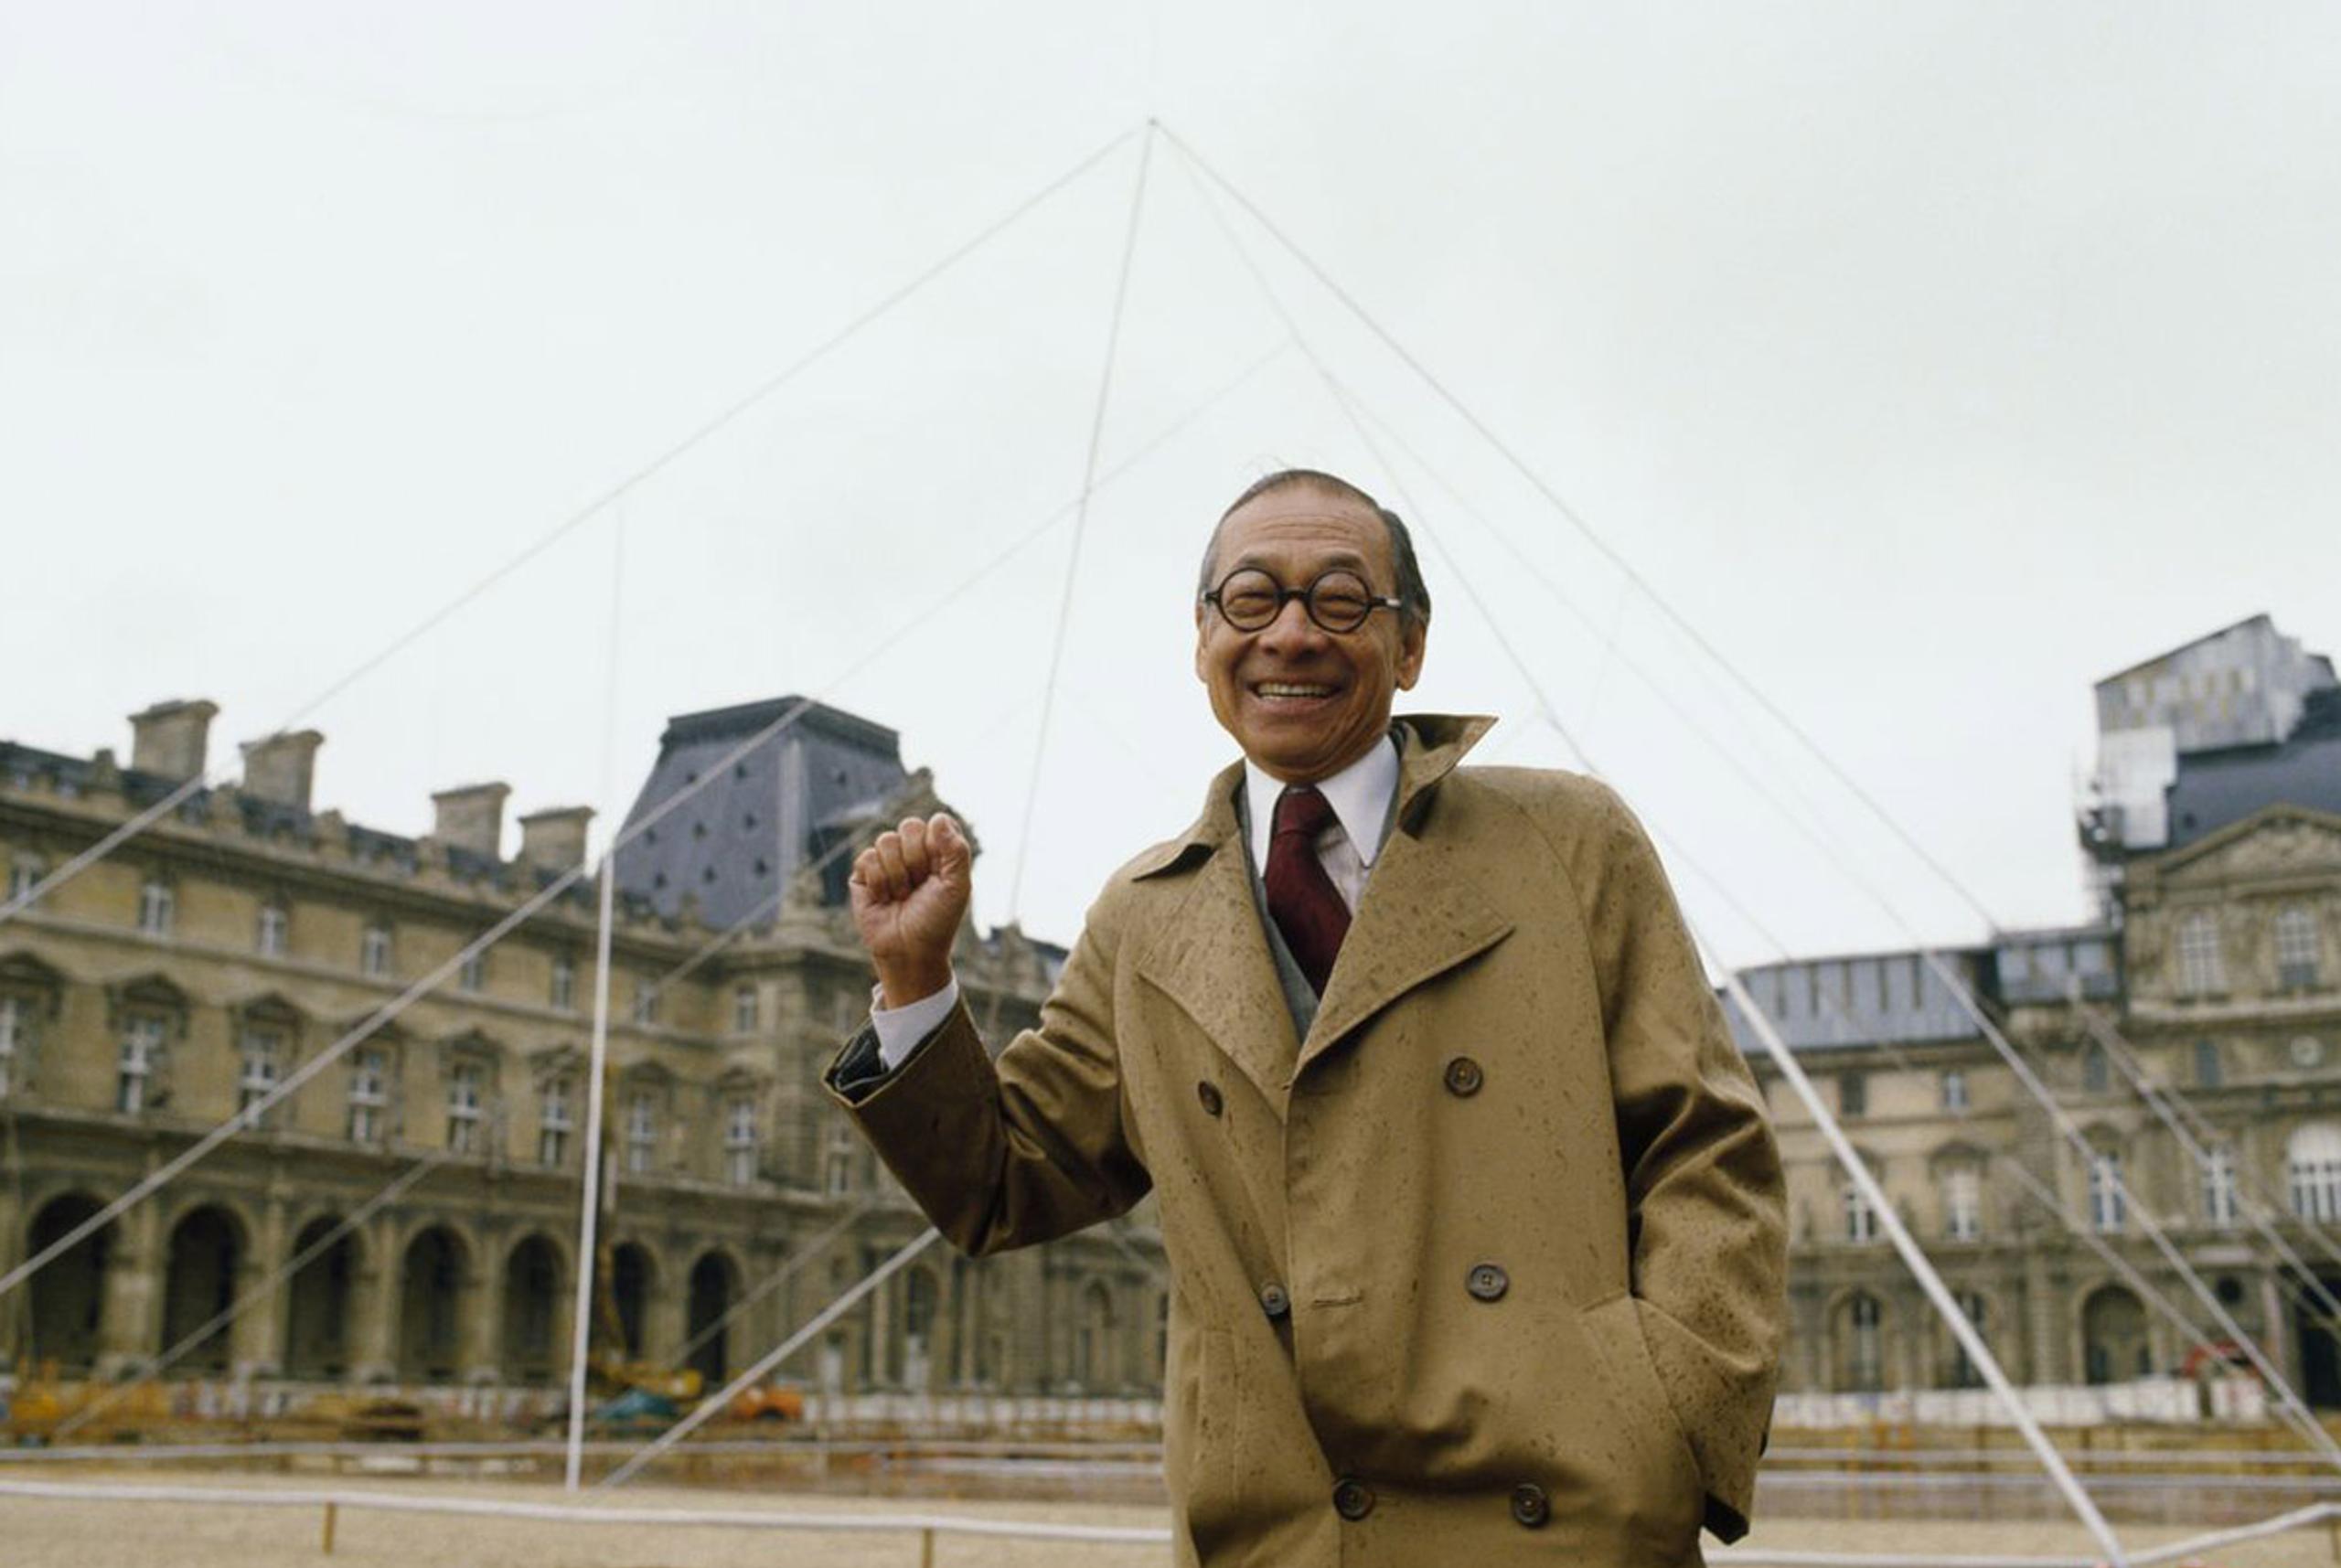 architect I.M. Pei in front of modern structure